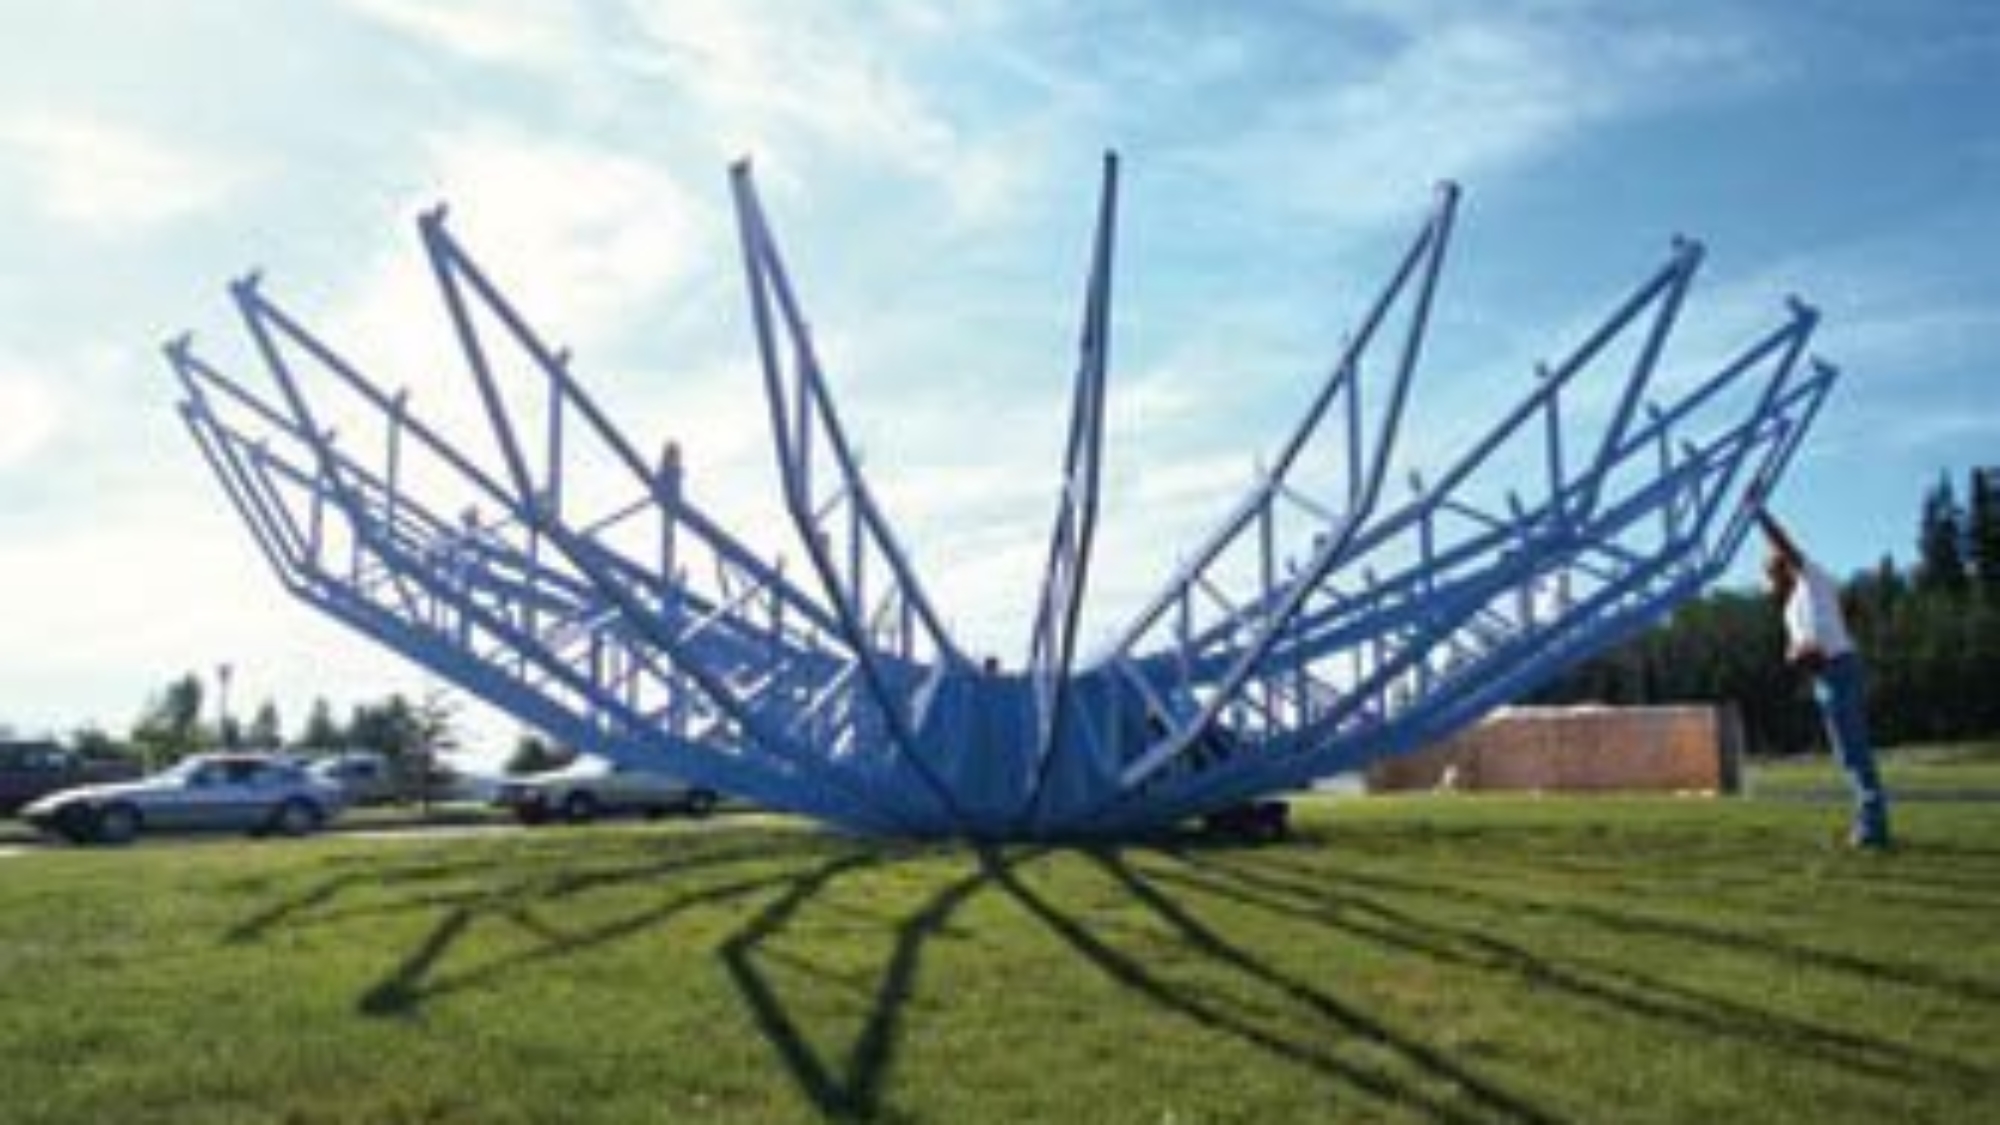 10-meter antenna construction underway - Photographed by Jim Coccia